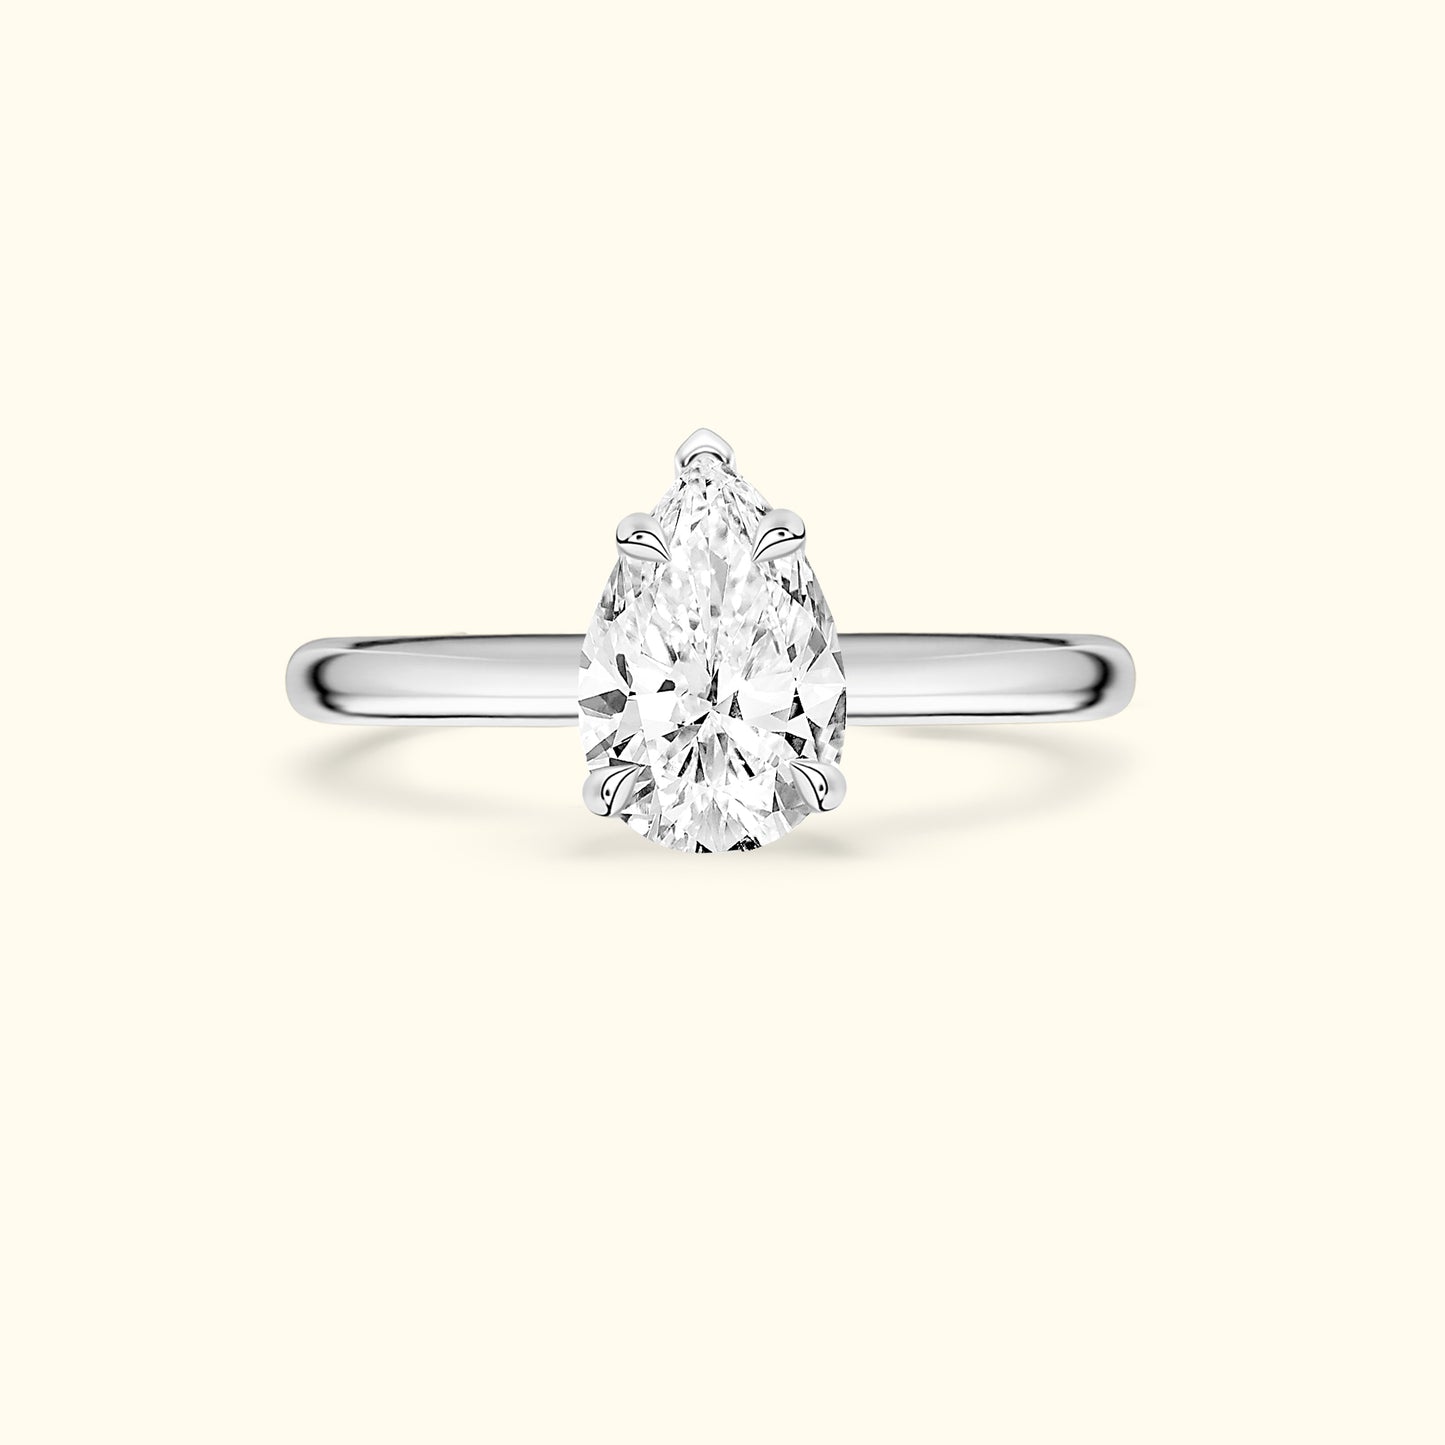 'Lilian' Ring with 1.54ct Pear Diamond